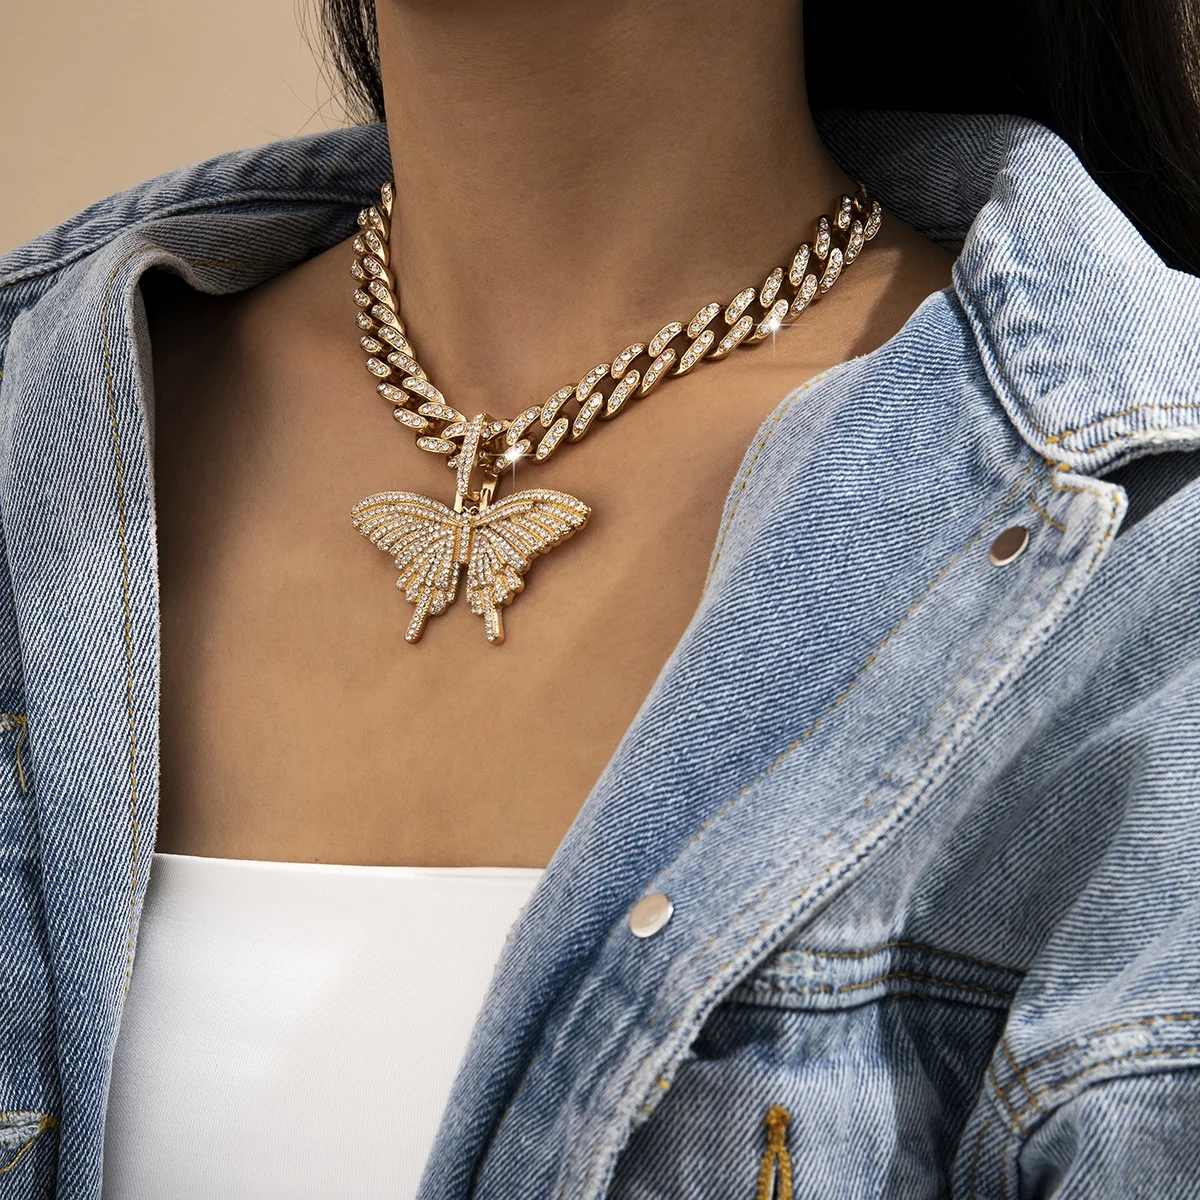 

Big Butterfly Pendant Choker Necklace Rhinestone Miami Curb Cuban Link Chain Hip Hop Necklace Rapper Rock Men Women Jewelry Gift, Picture shows